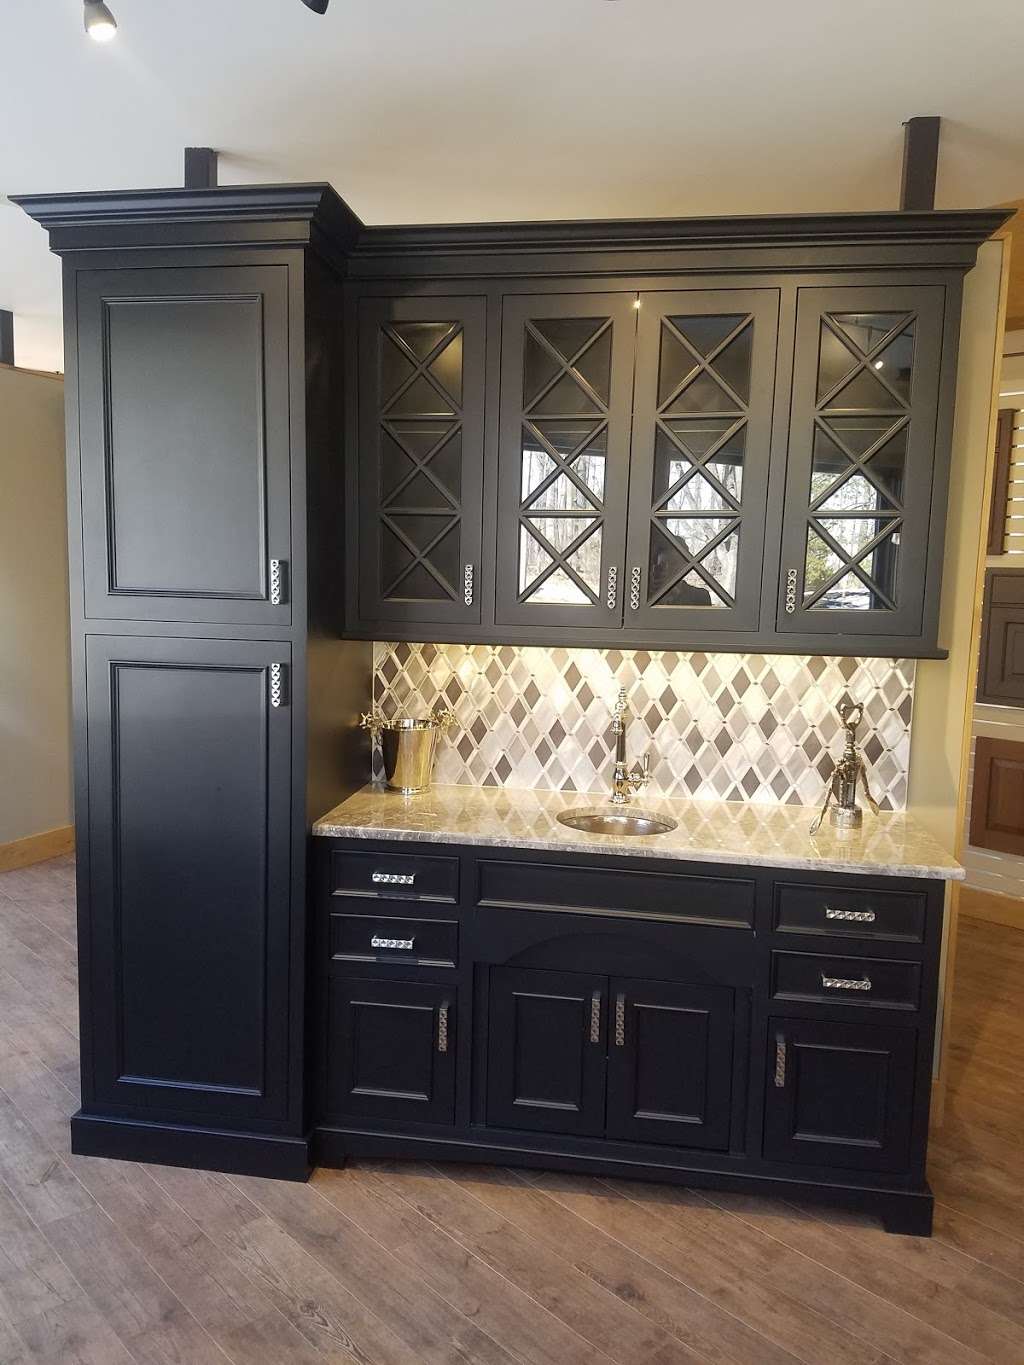 Bucks County Cabinetry and Design | 4030 Skyron Dr k, Doylestown, PA 18902 | Phone: (215) 489-0851